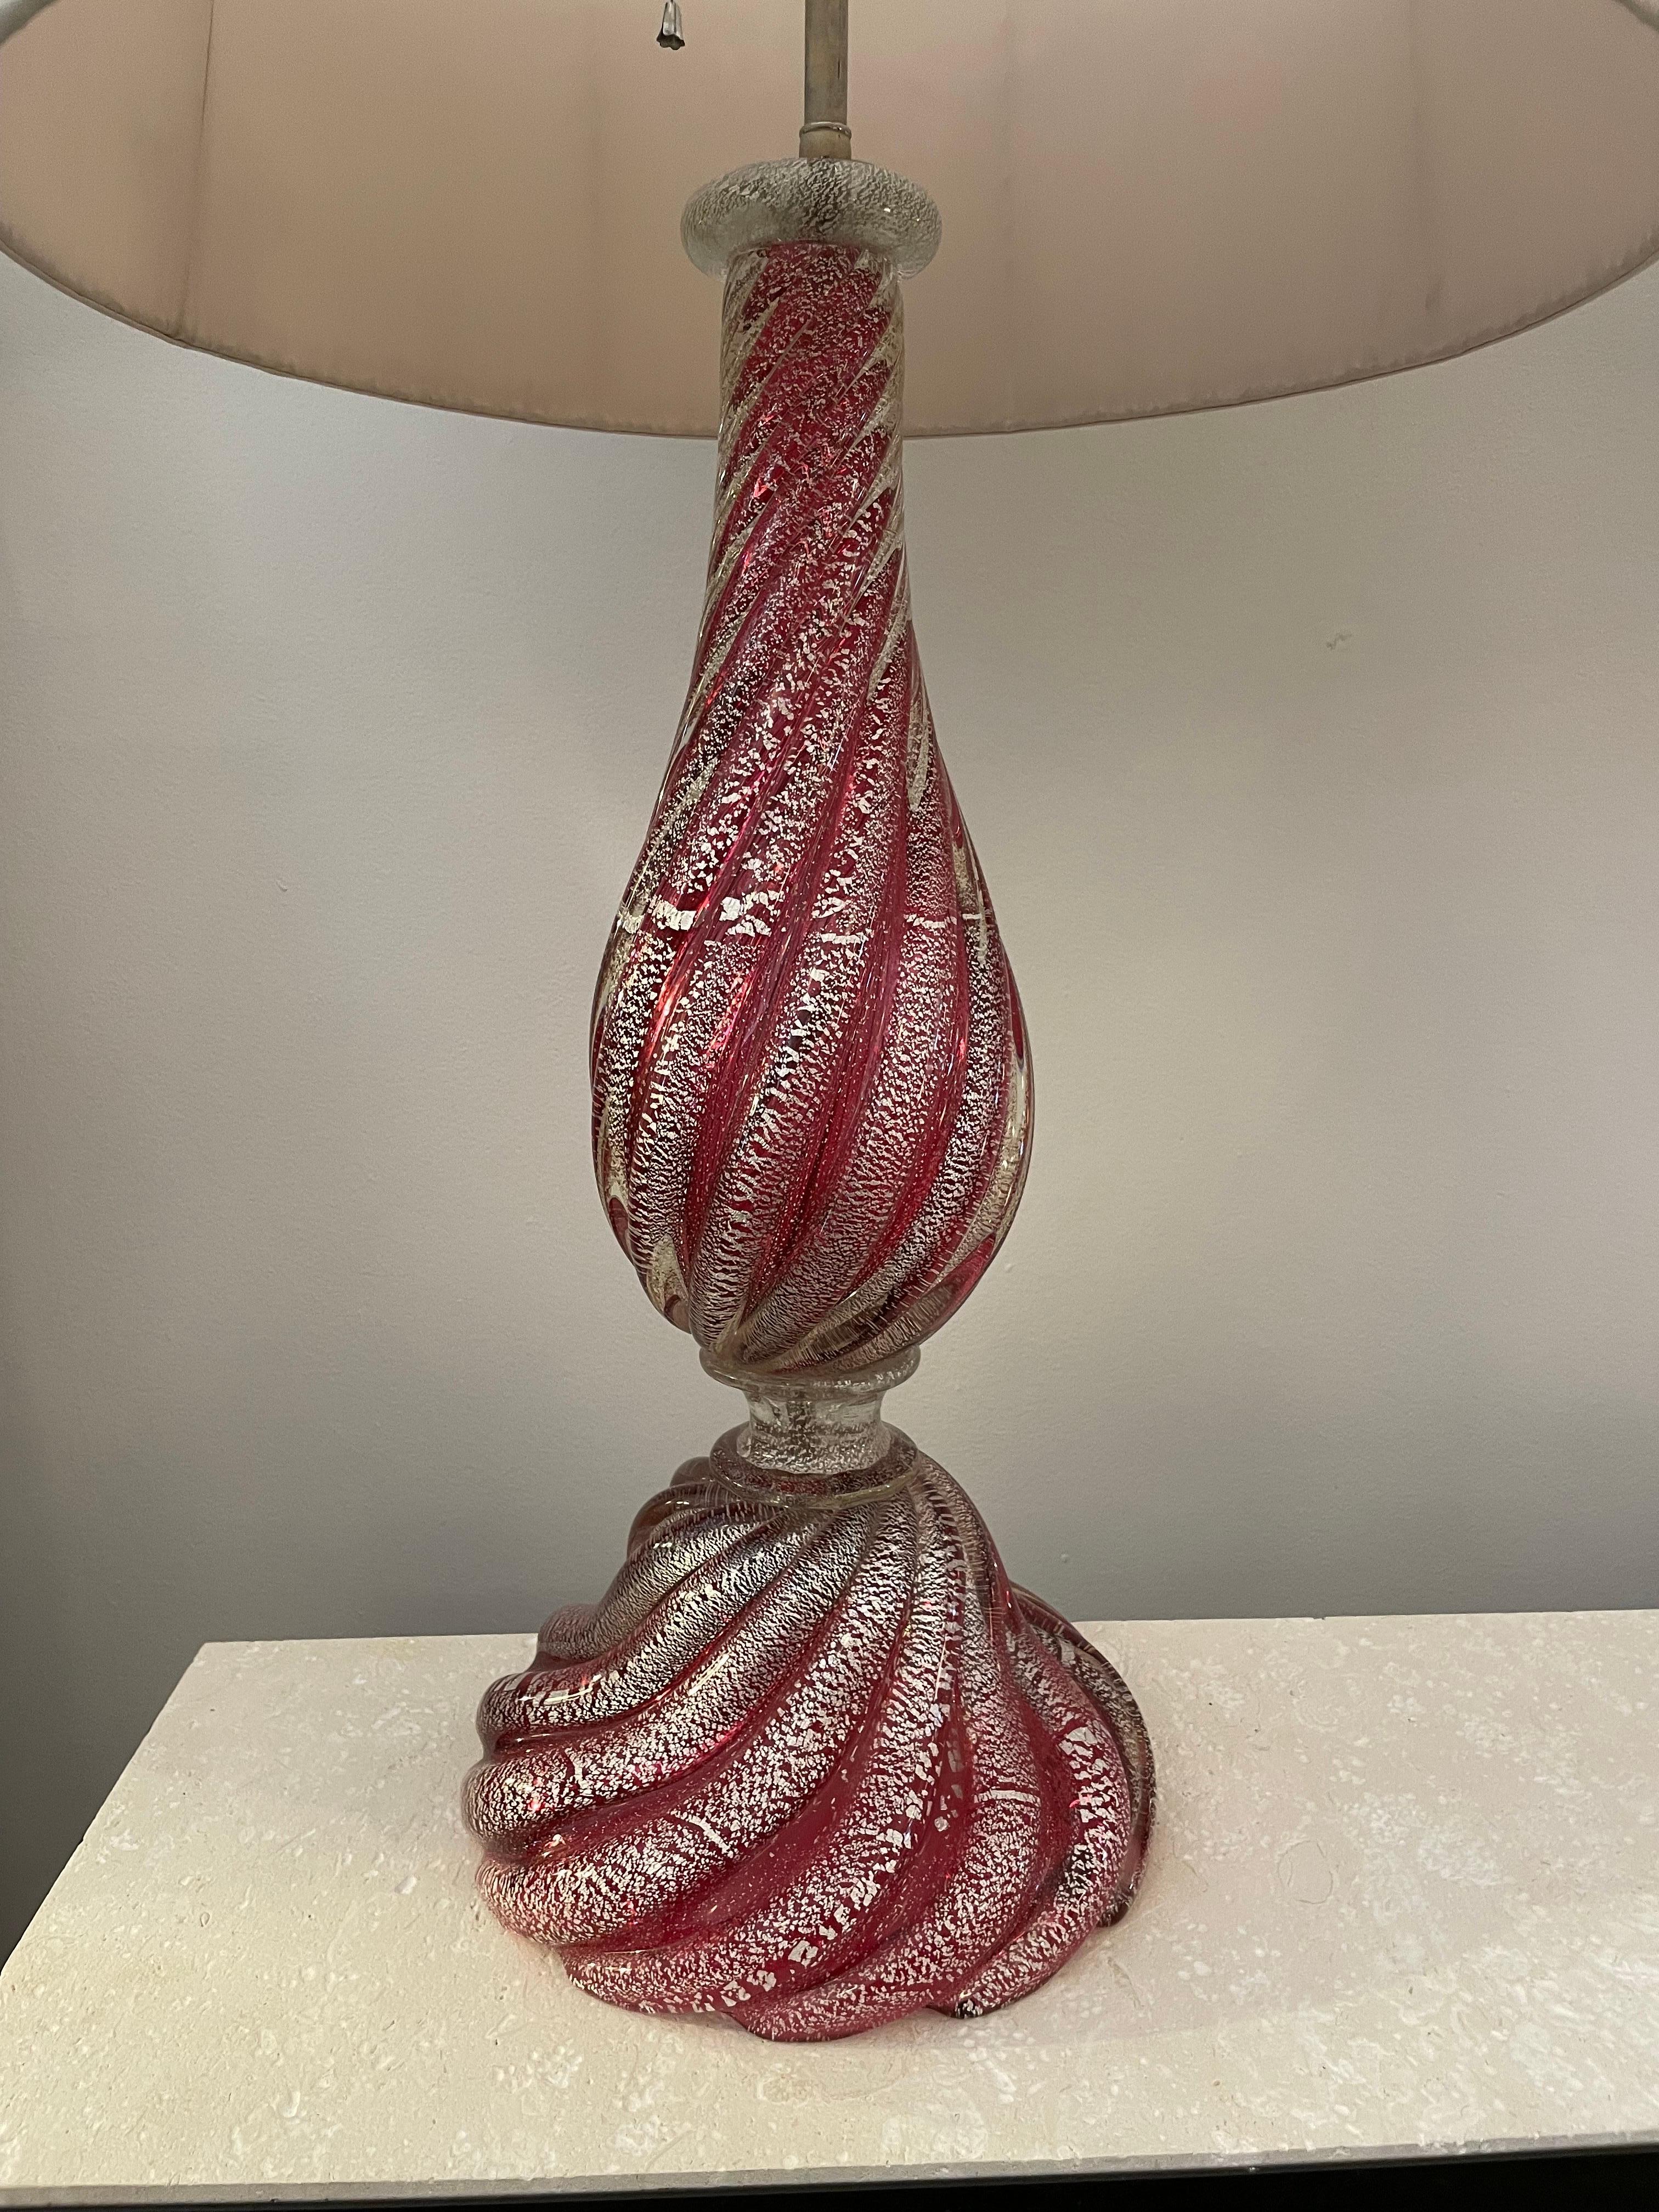 Oversized Raspberry Murano Glass Lamps W/ Silver Foil Inclusions by Barovier For Sale 1